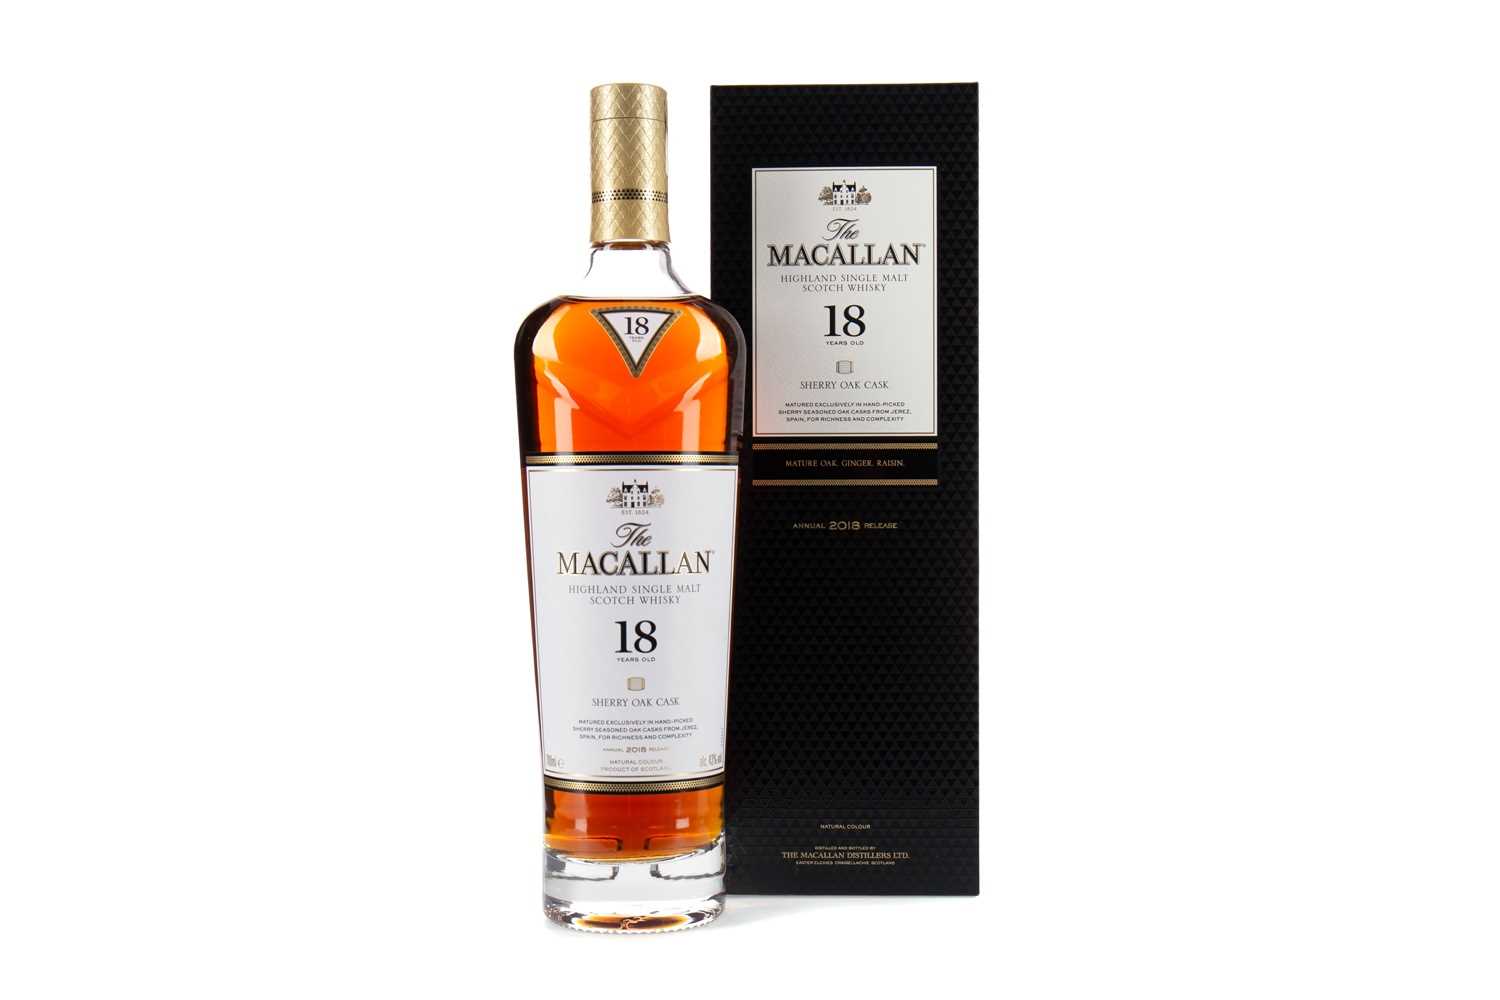 Lot 33 - MACALLAN 18 YEARS OLD 2018 RELEASE